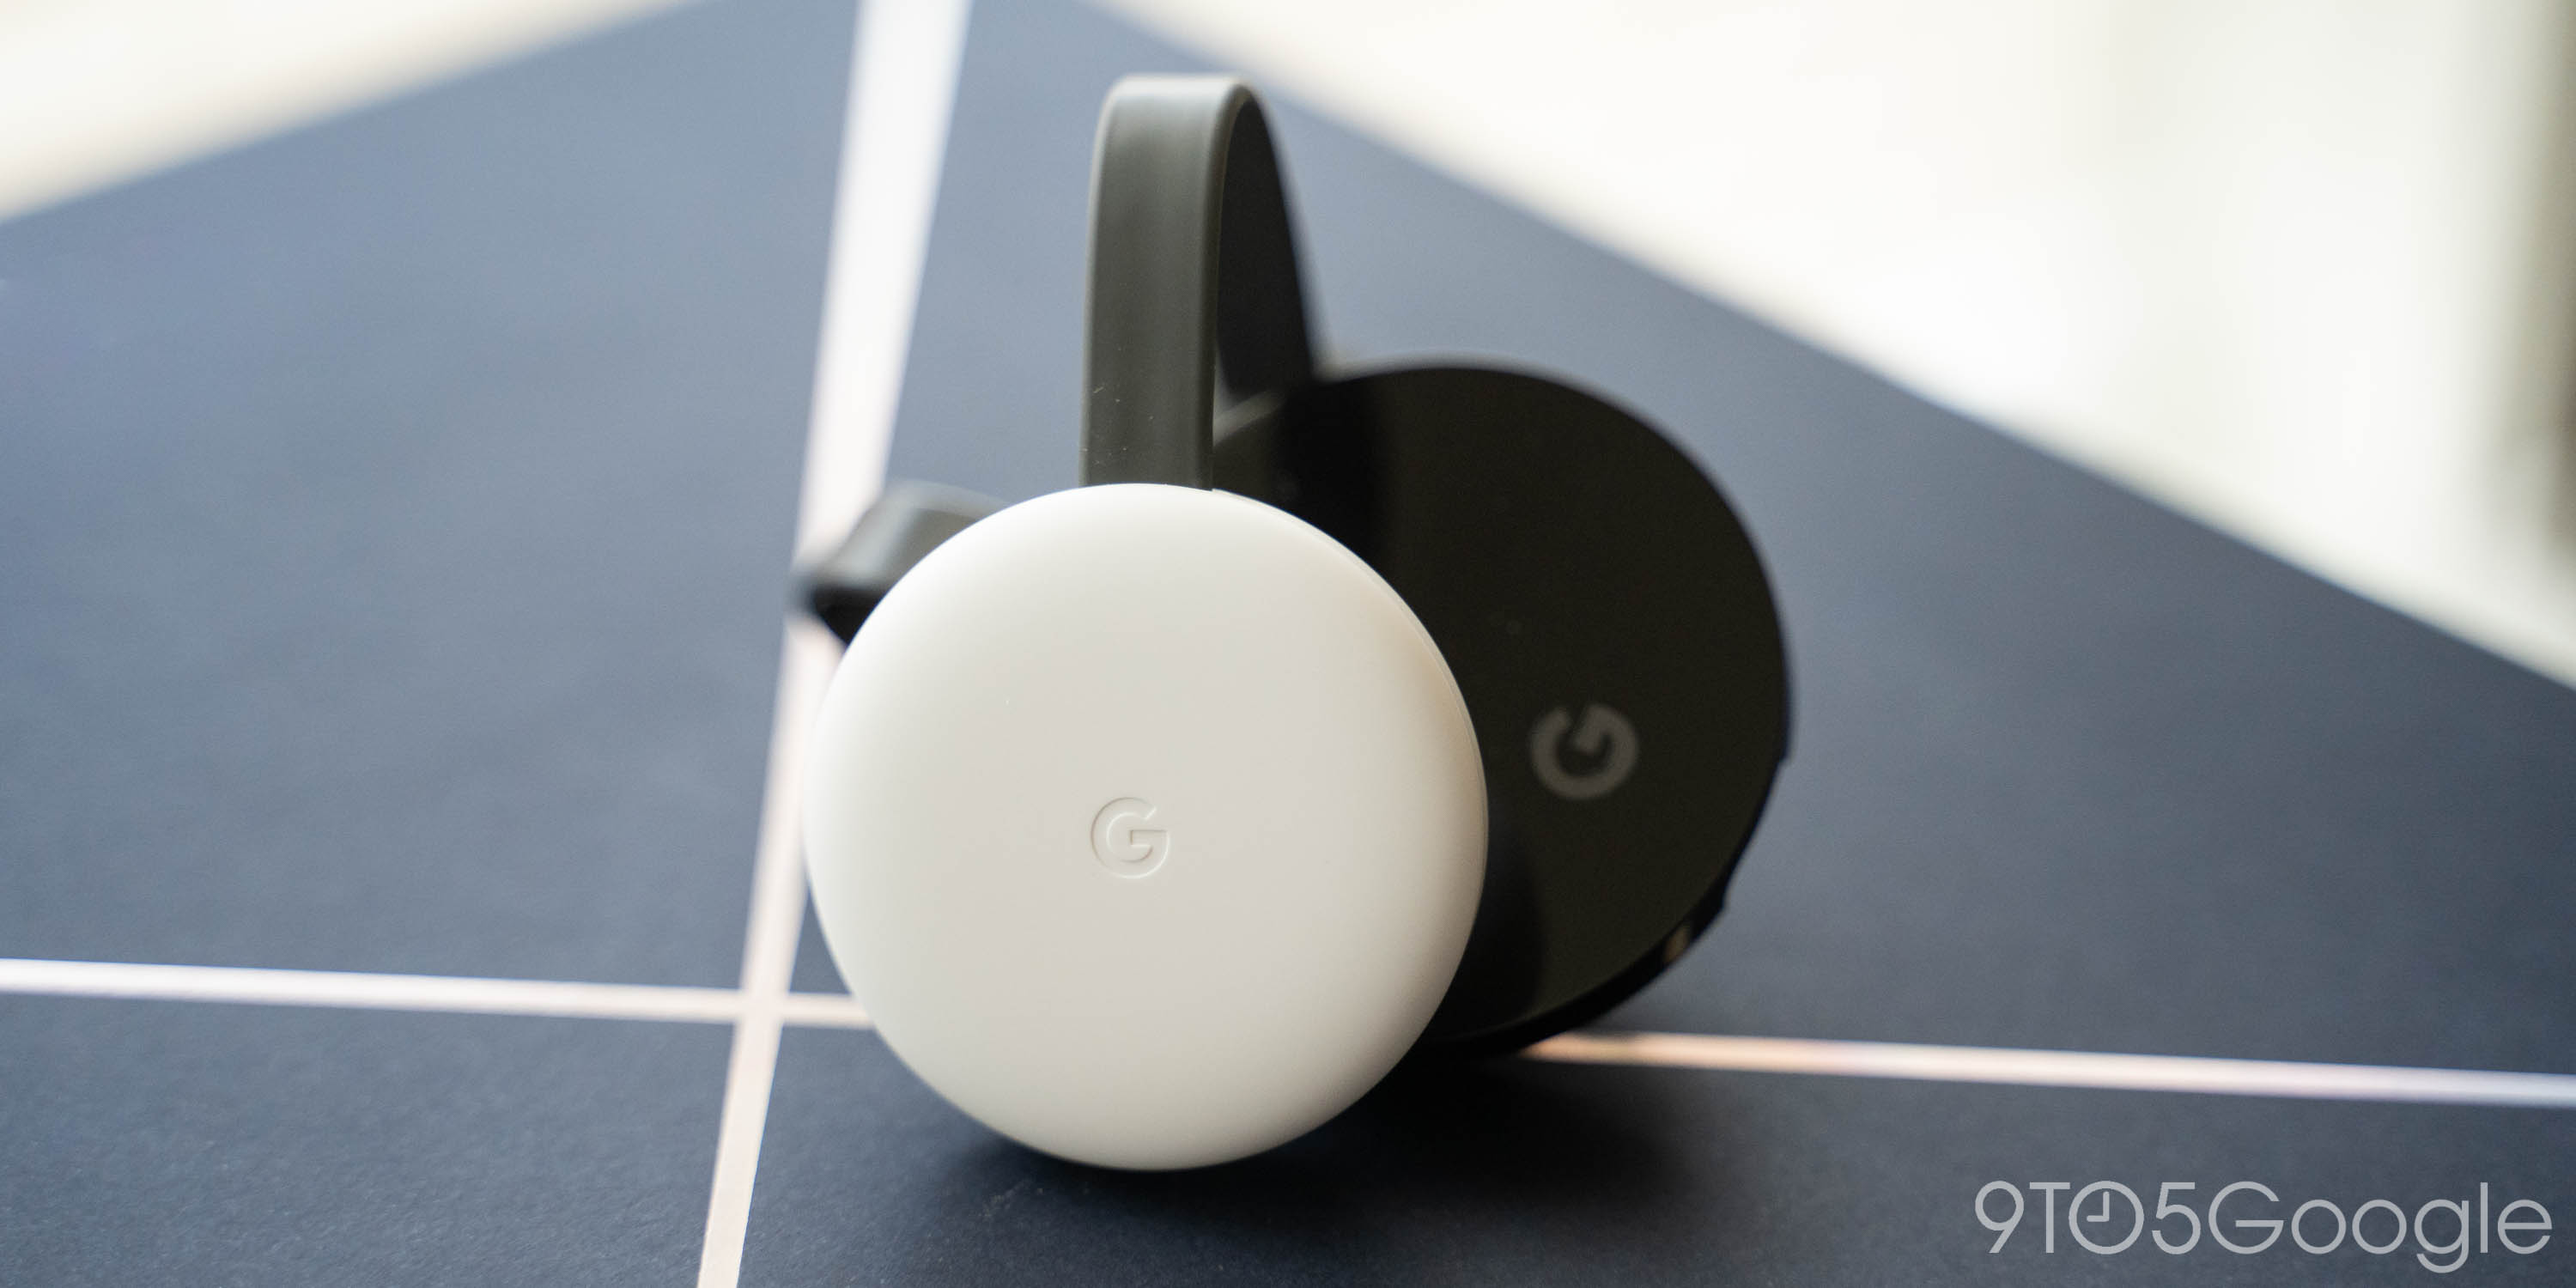 Chromecast breaks its app after months - 9to5Google